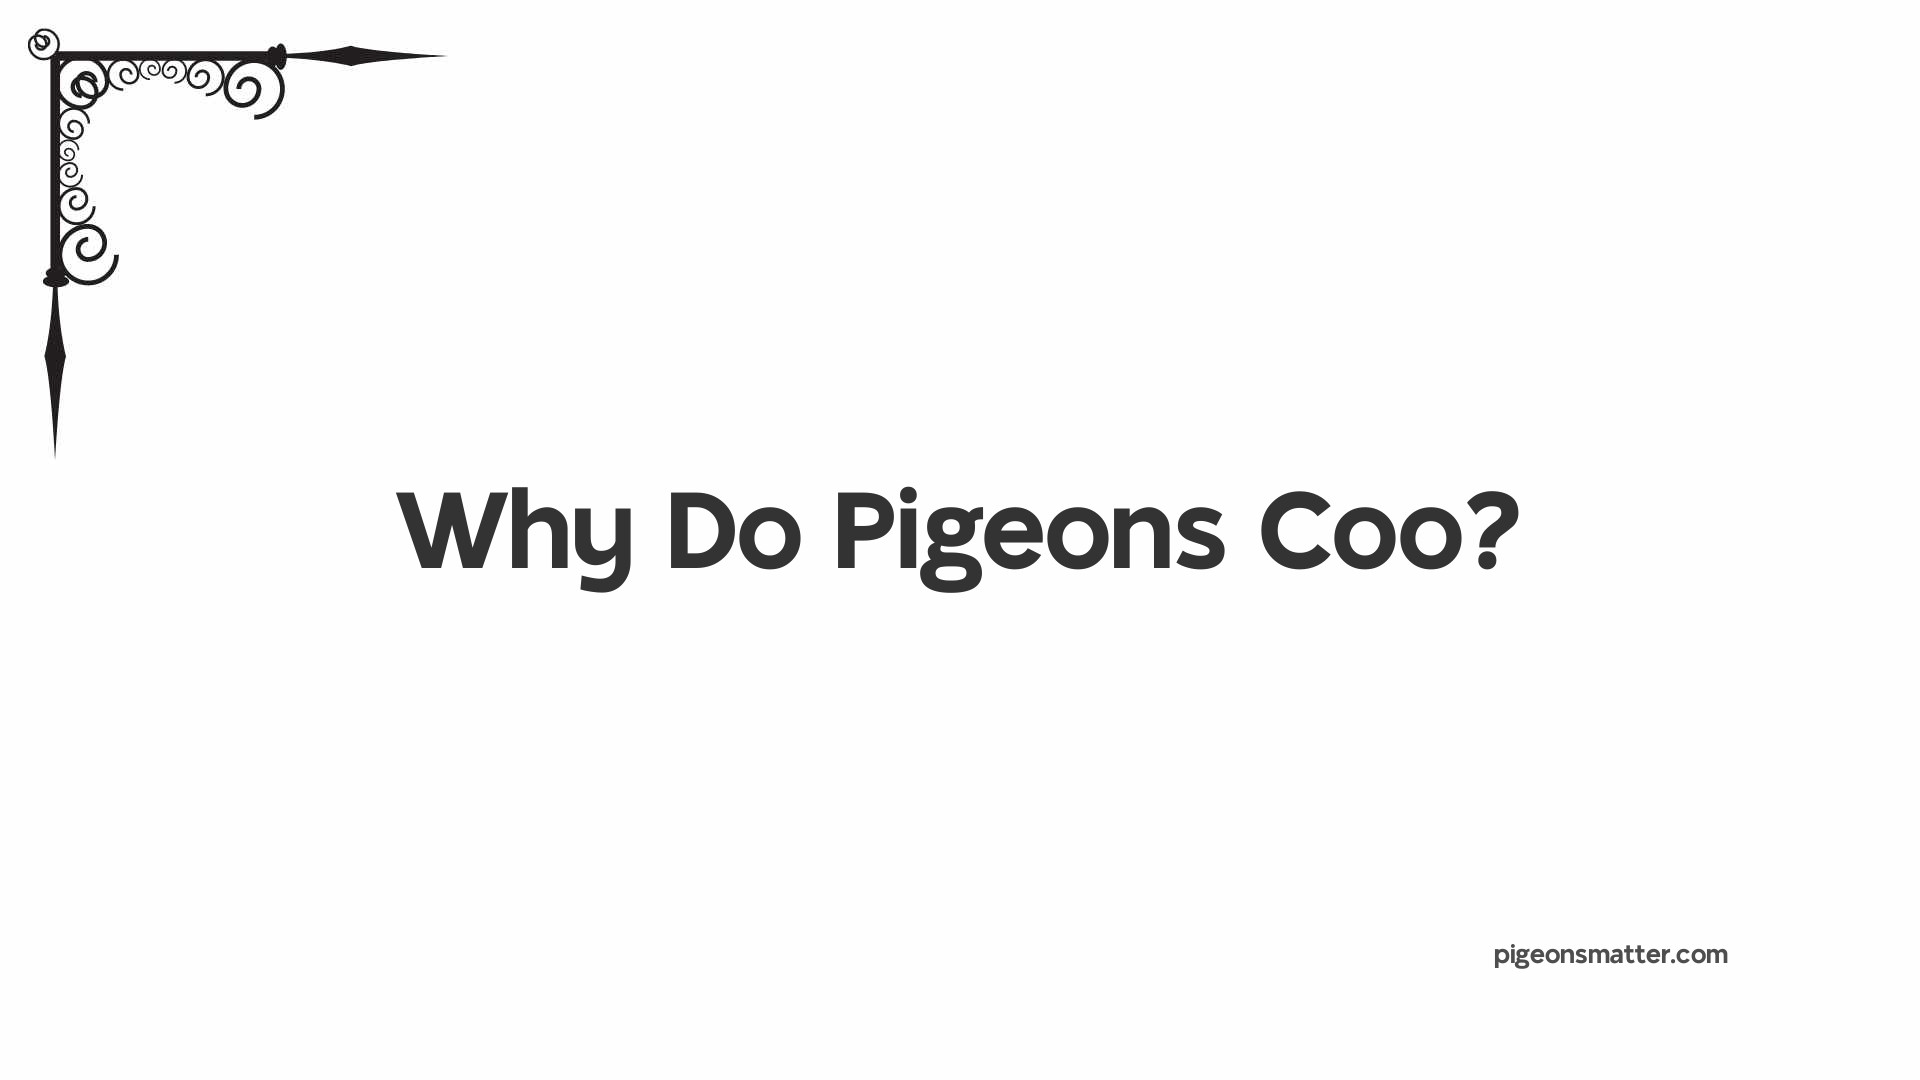 Why Do Pigeons Coo?